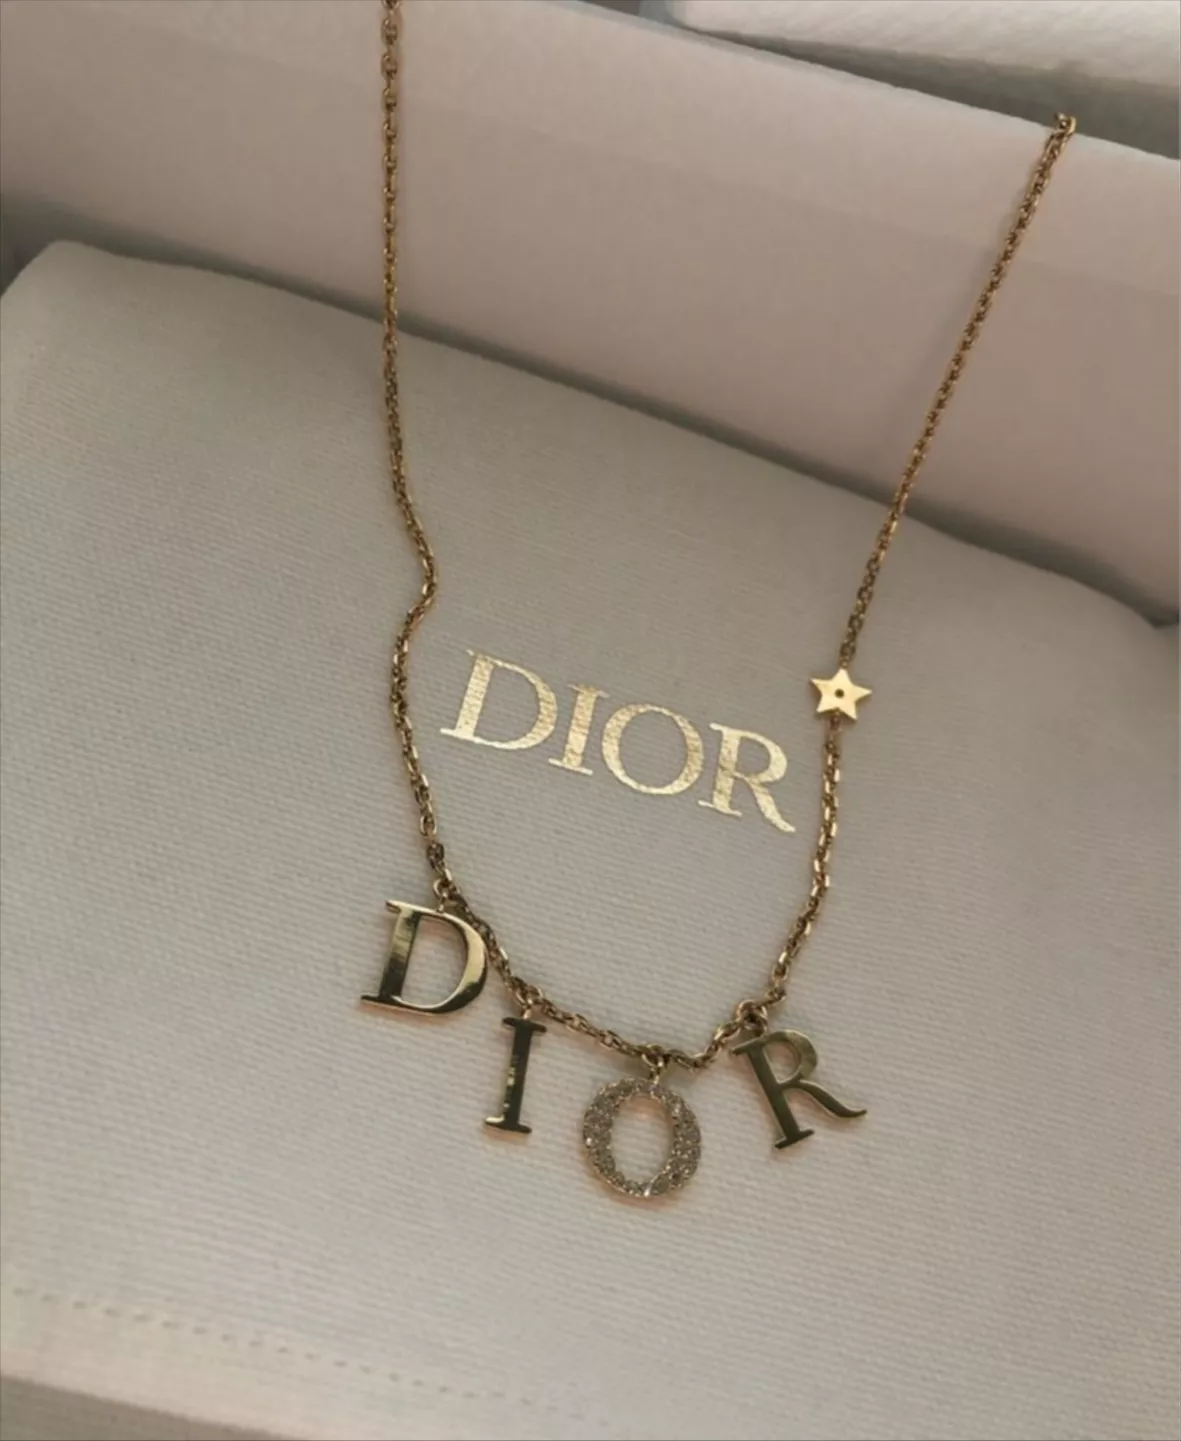 does anyone know where to find these dior or louis vuttion dupes? :) : r/ DHgate